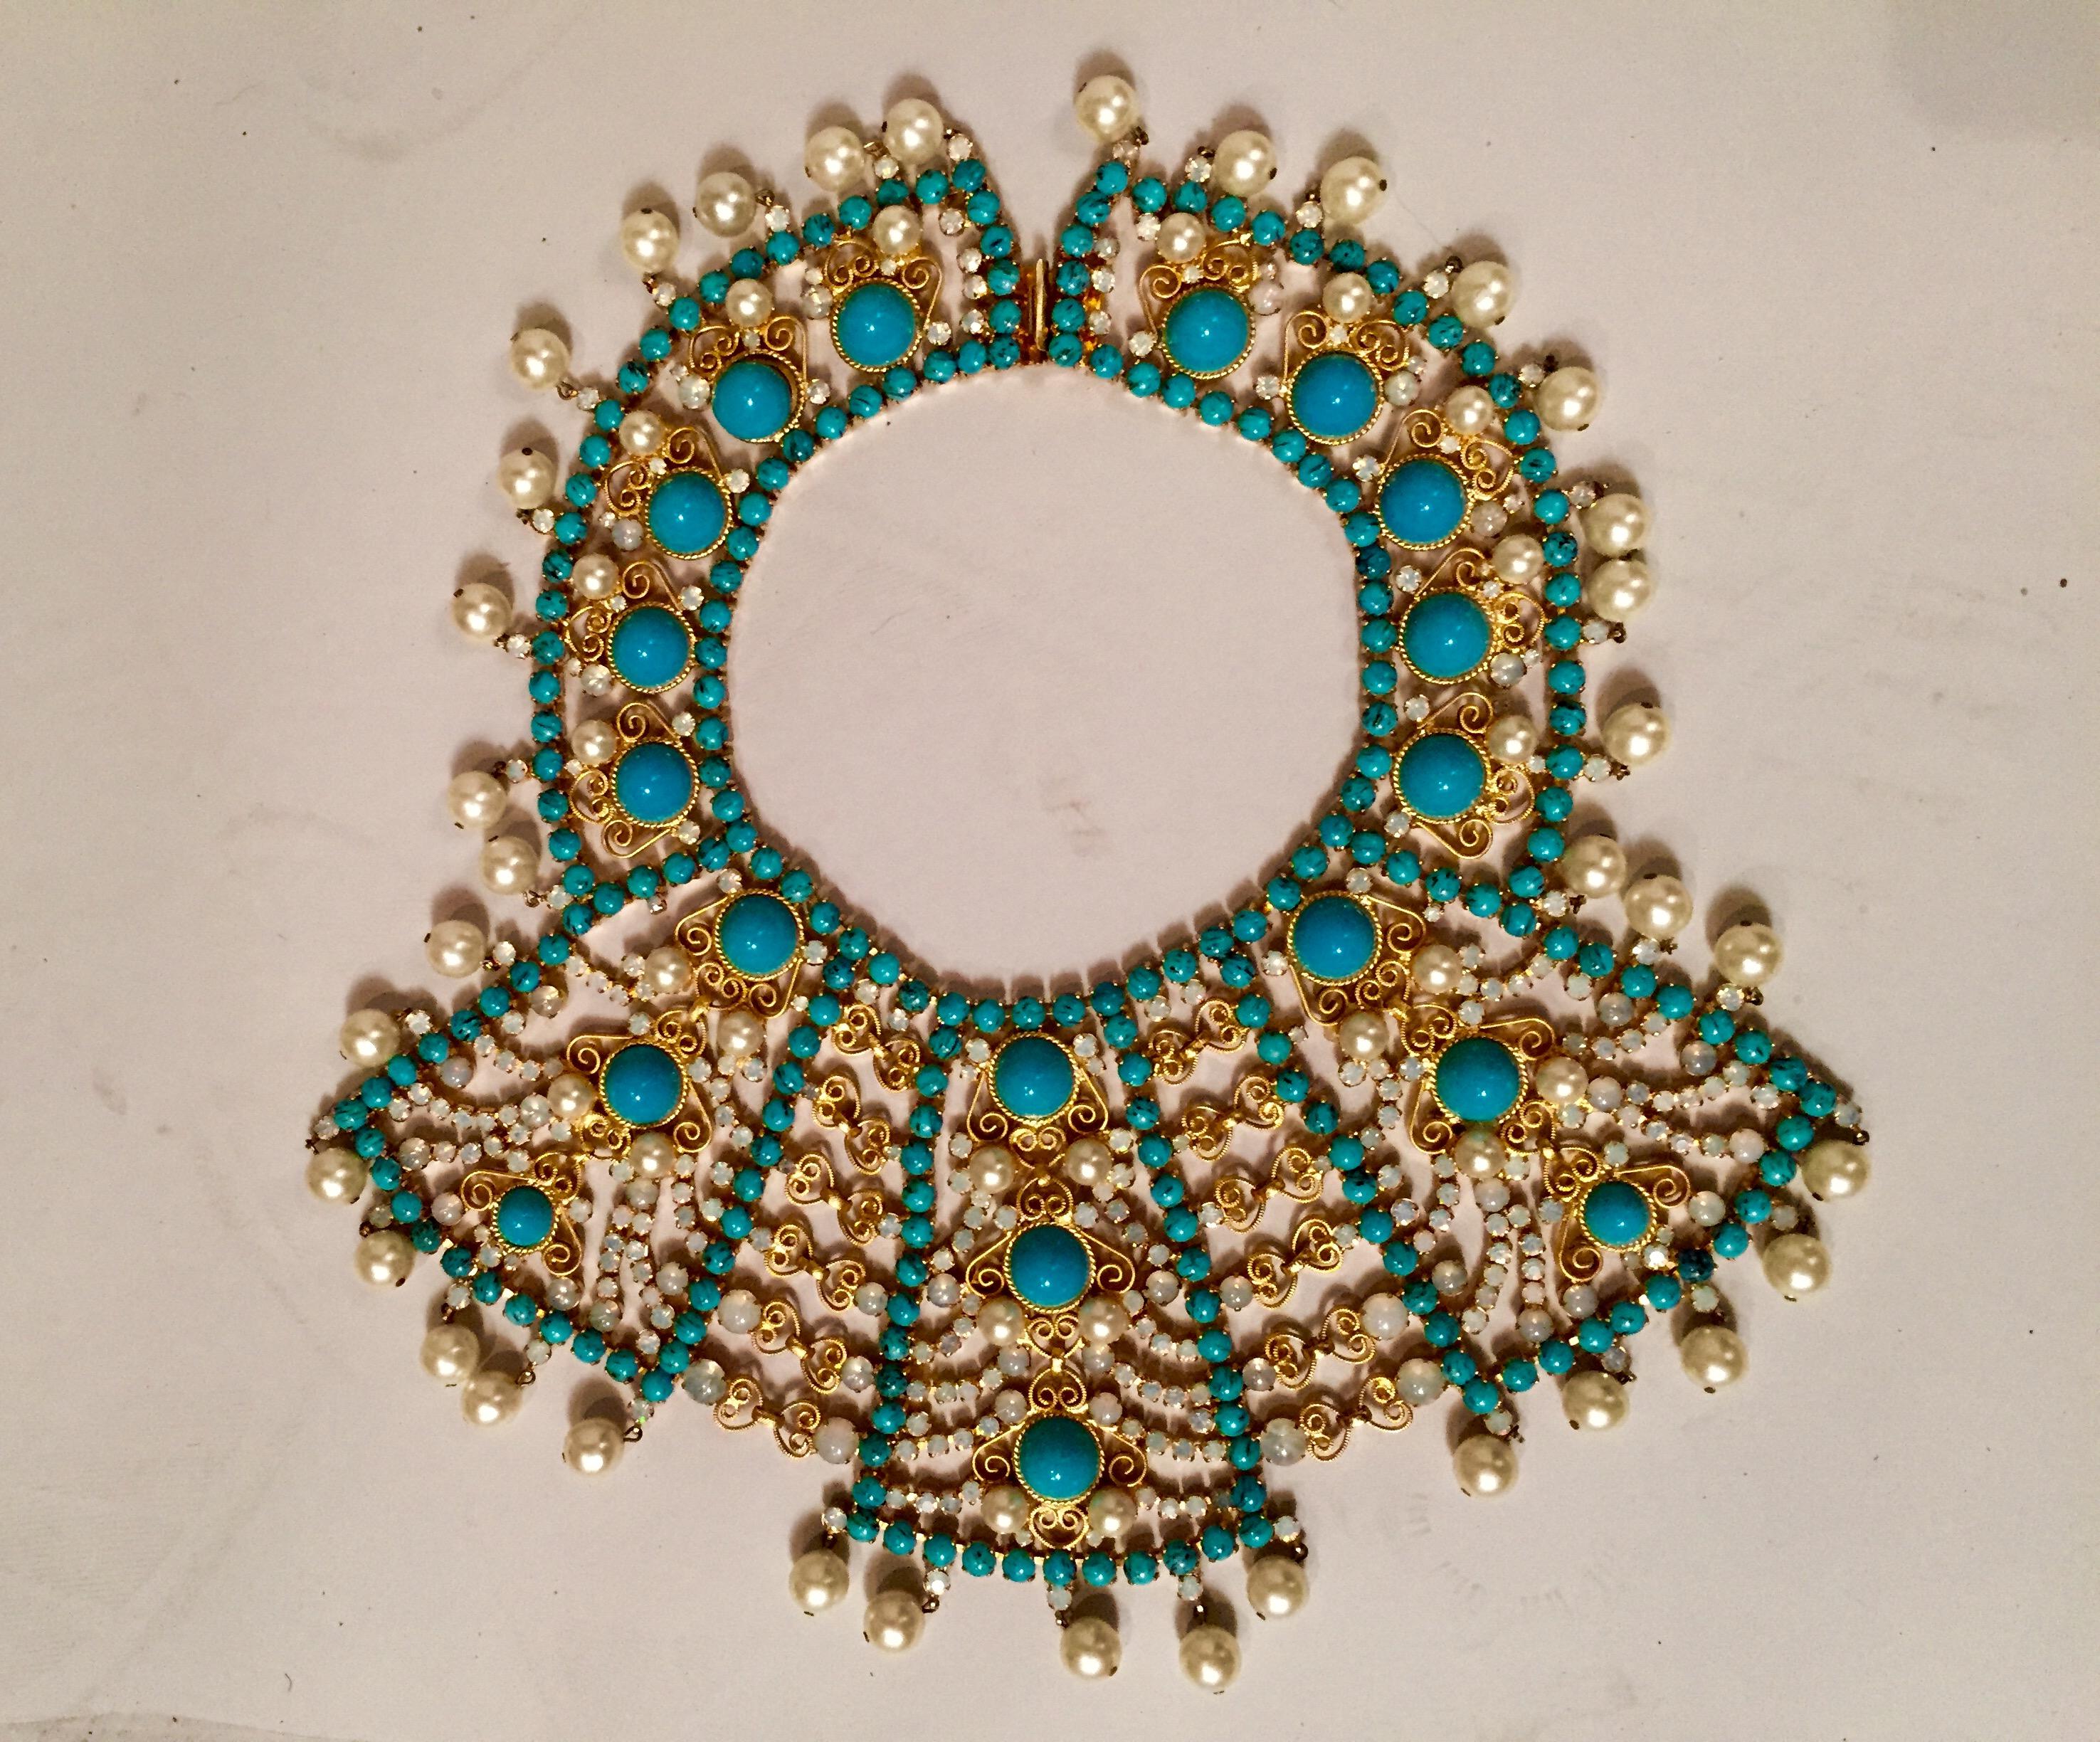 A striking combination of large and small turquoise stones, cabochon and faceted moonstones in two sizes and lustrous pearls that are set into the necklace as well as suspended along the edge. This large scale bib necklace is made from gold toned